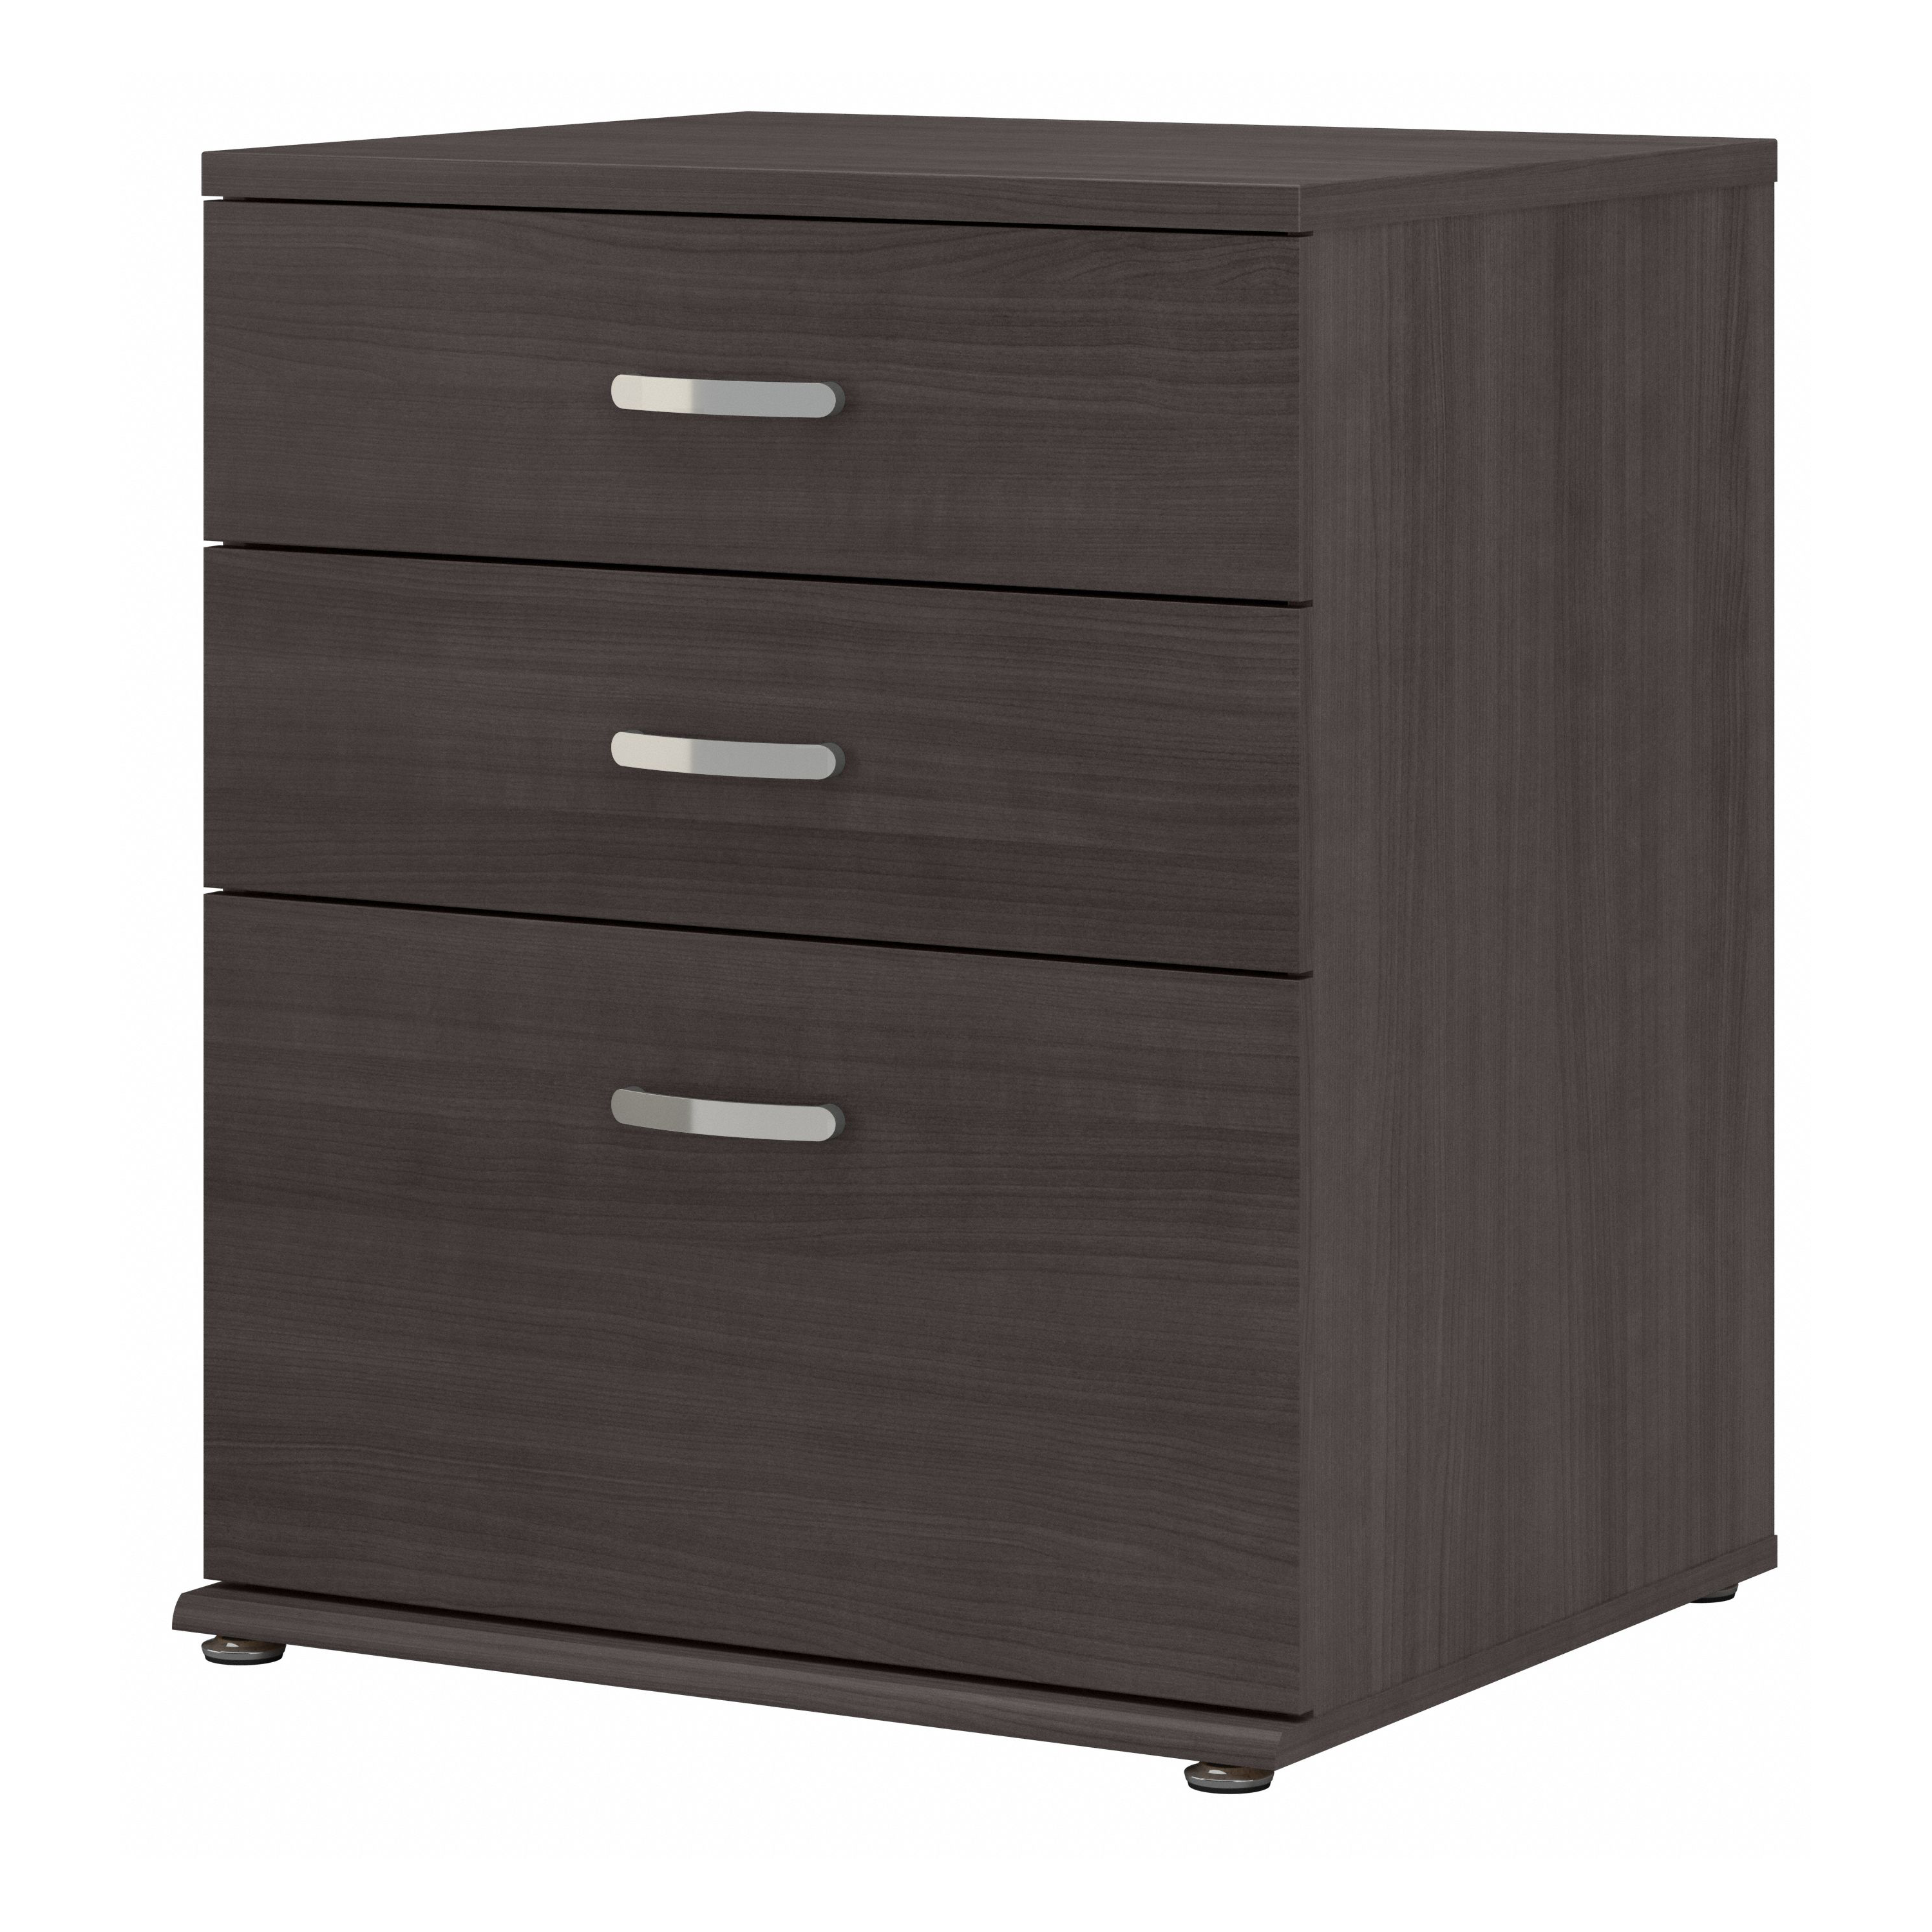 Shop Bush Business Furniture Universal Garage Storage Cabinet with Drawers 02 GAS328SG-Z #color_storm gray